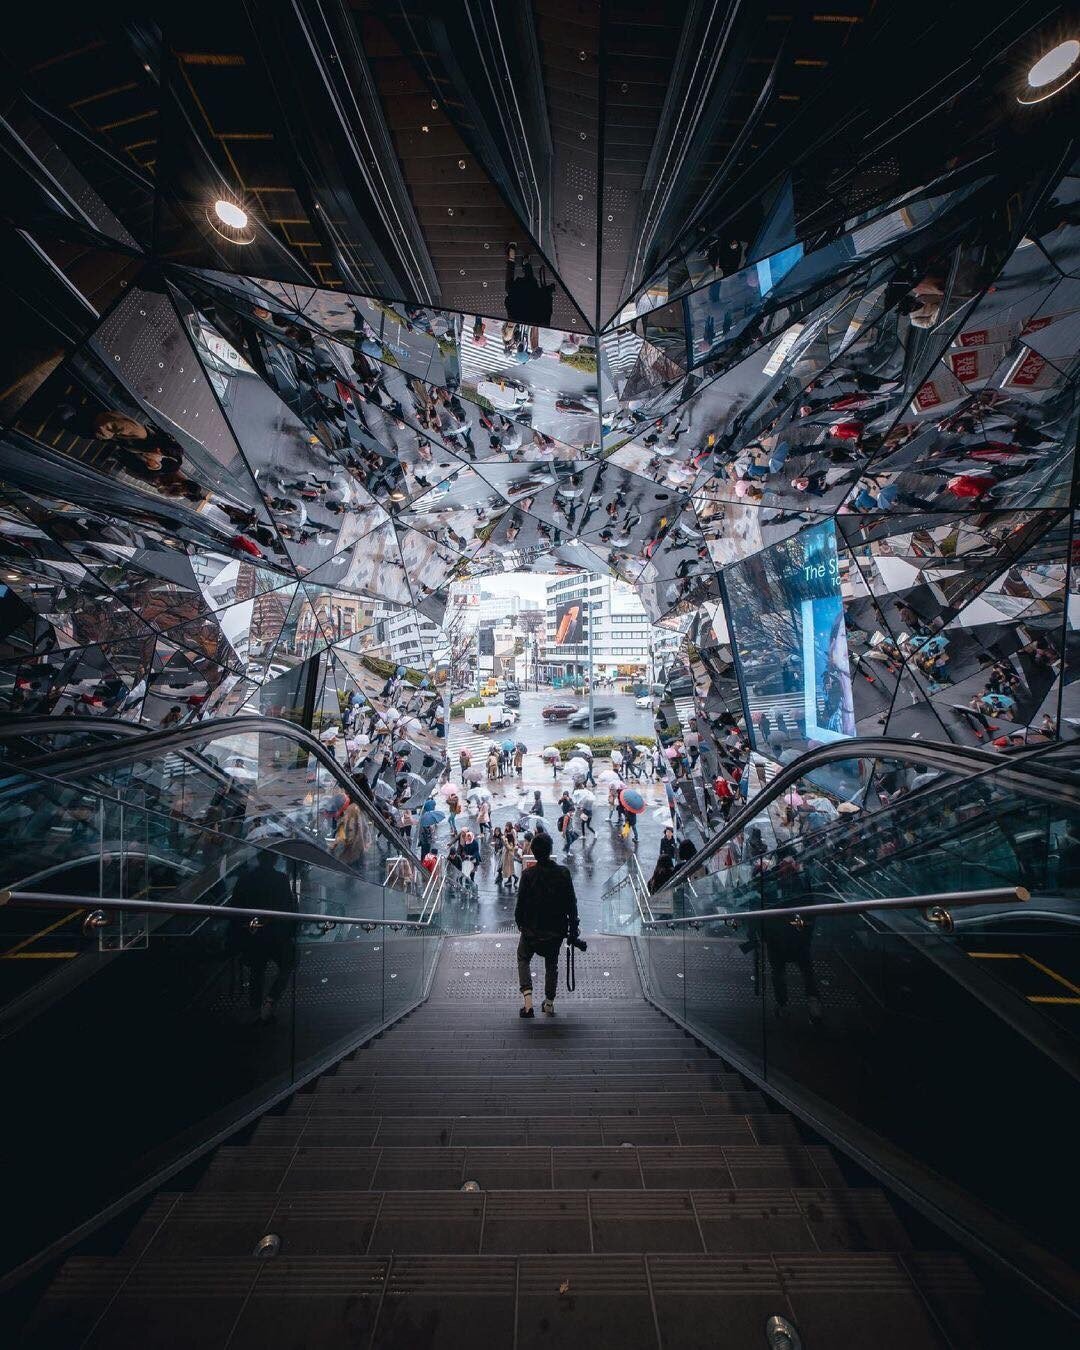 📸Photo opportunity in Tokyo📸
The Tokyu Plaza entrance in Omotesando features this unique kaleidoscope for an insane photo opportunity. 
&bull;&bull;&bull;
Posted @withregram &bull; @kohki 

#hellofrom Tokyo, Japan

#japan #tokyo #traveljapan #trave